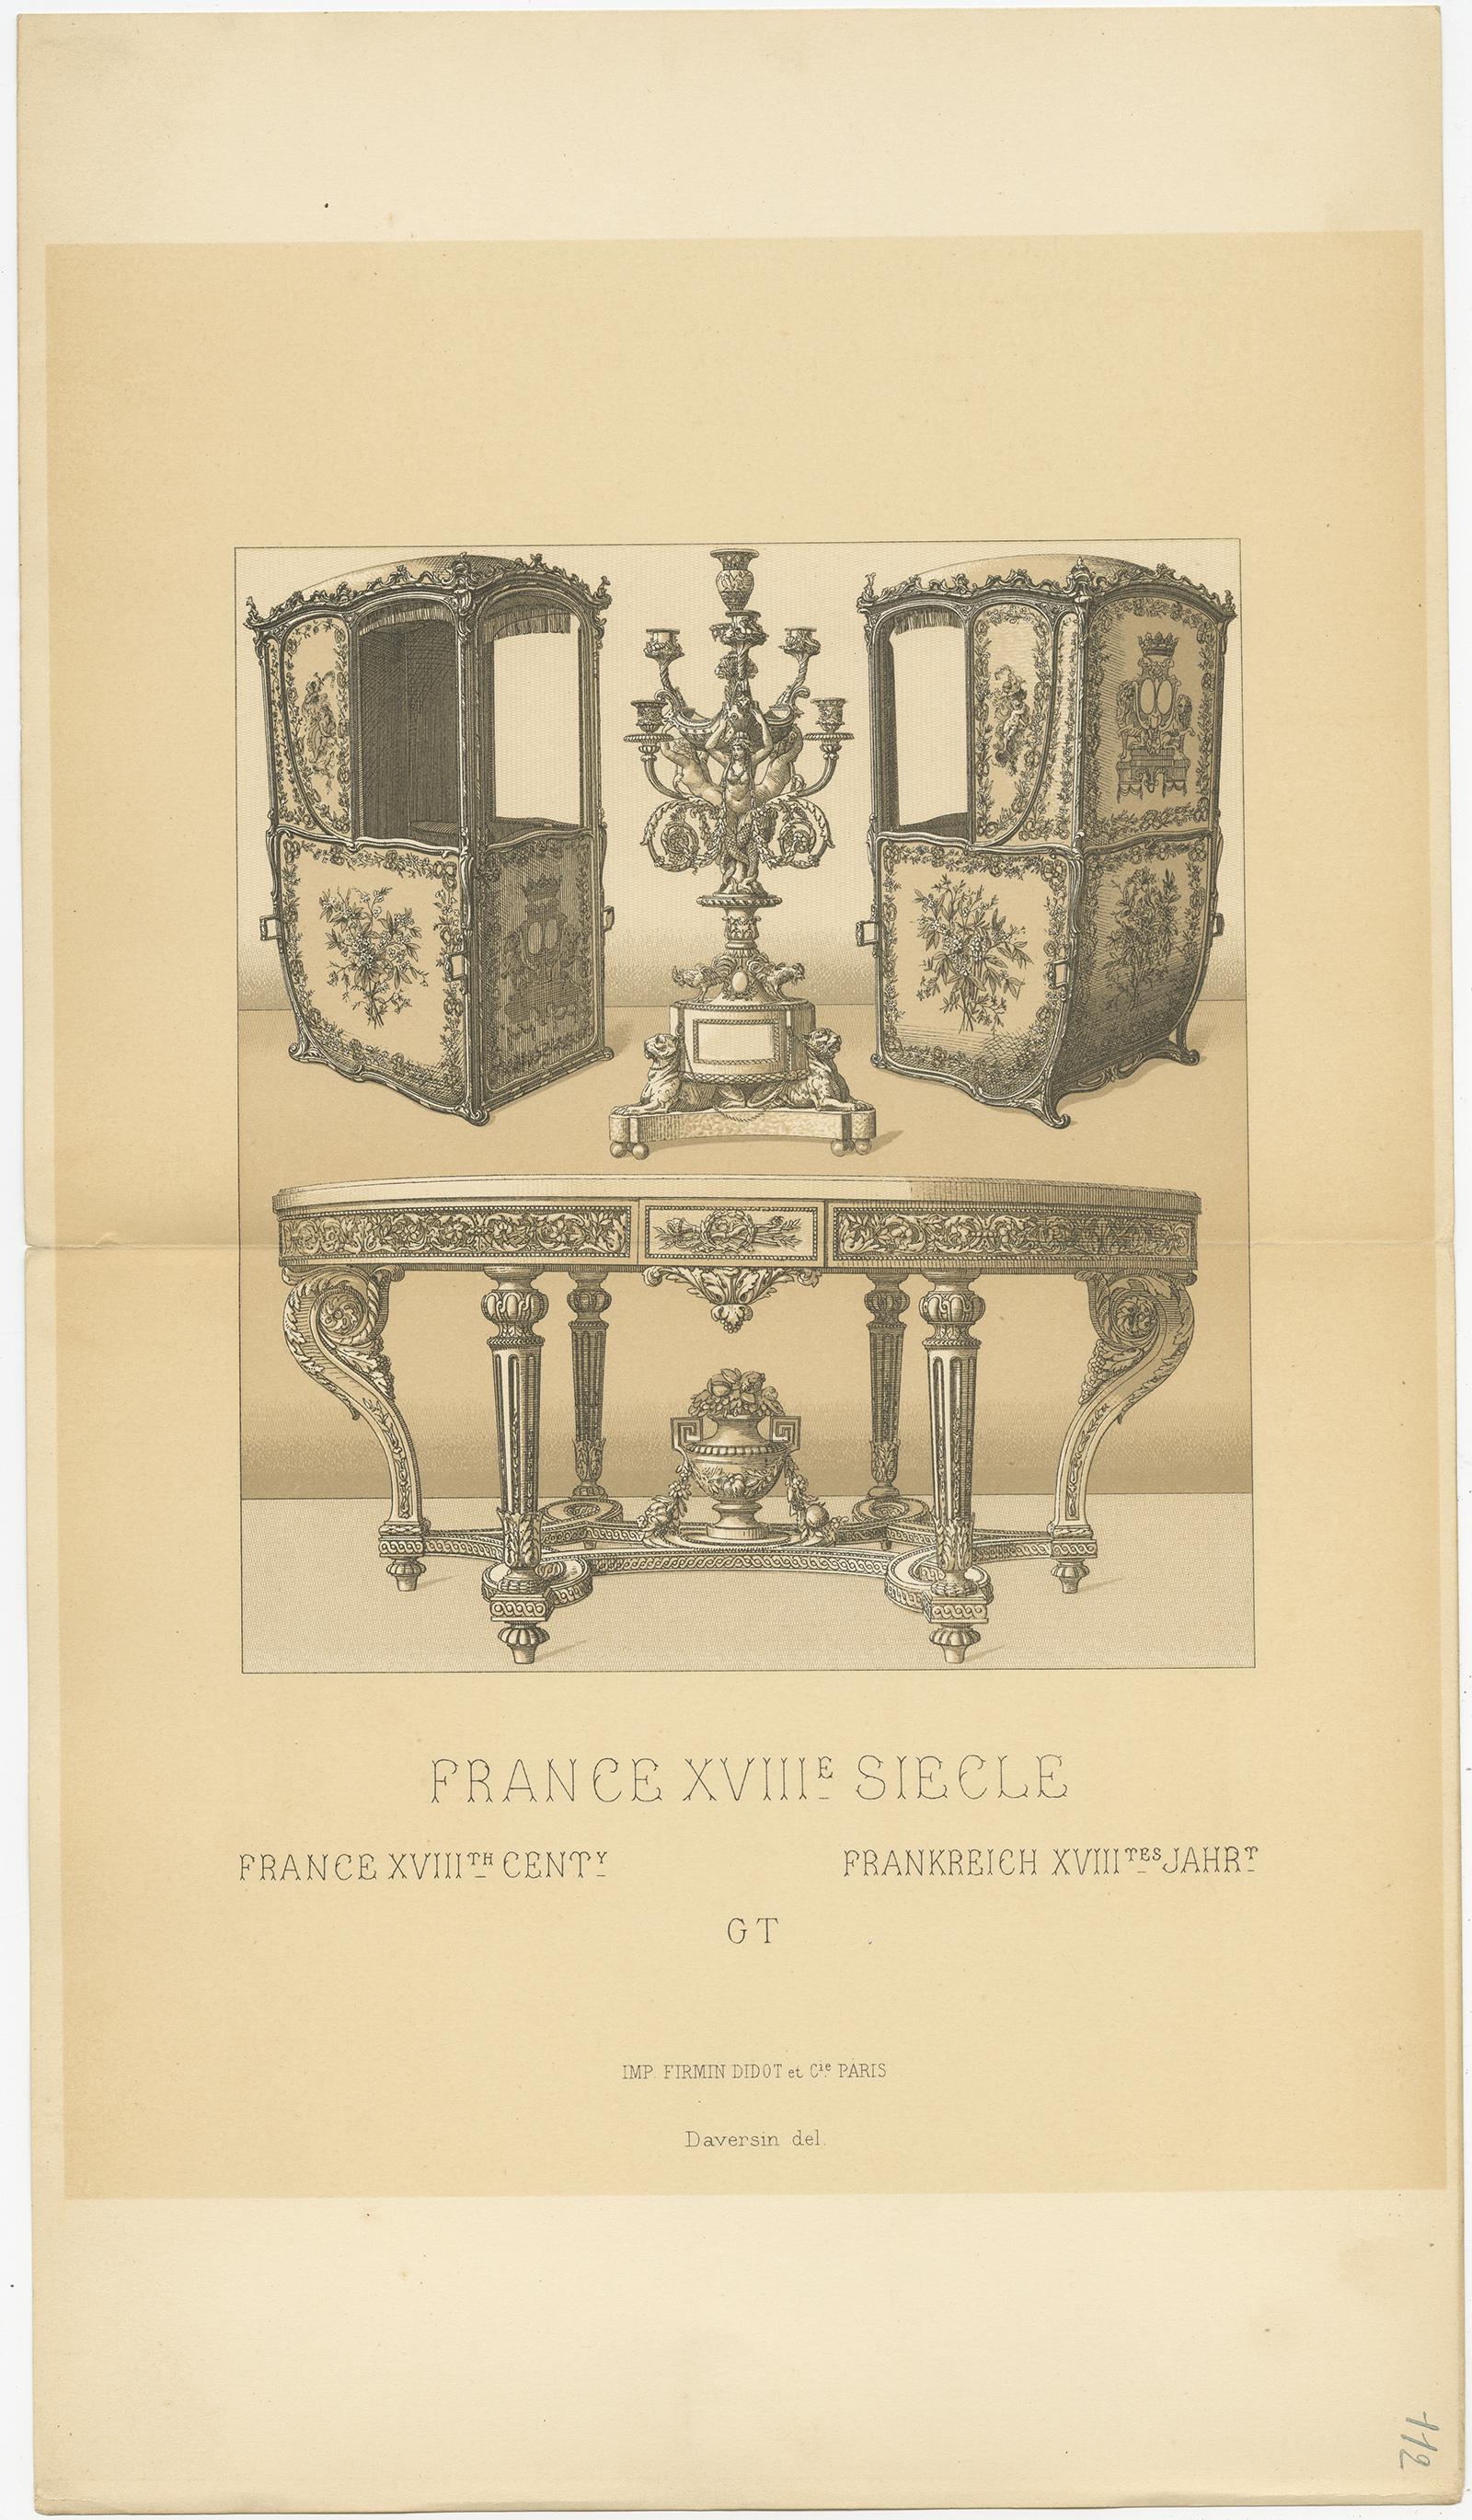 Antique print titled 'France XVIIIth Cent - France XVIIIe, Siecle - Frankreich XVIIItes Jahr'. Chromolithograph of French 18th century furniture. This print originates from 'Le Costume Historique' by M.A. Racinet. Published, circa 1880.

Small cut